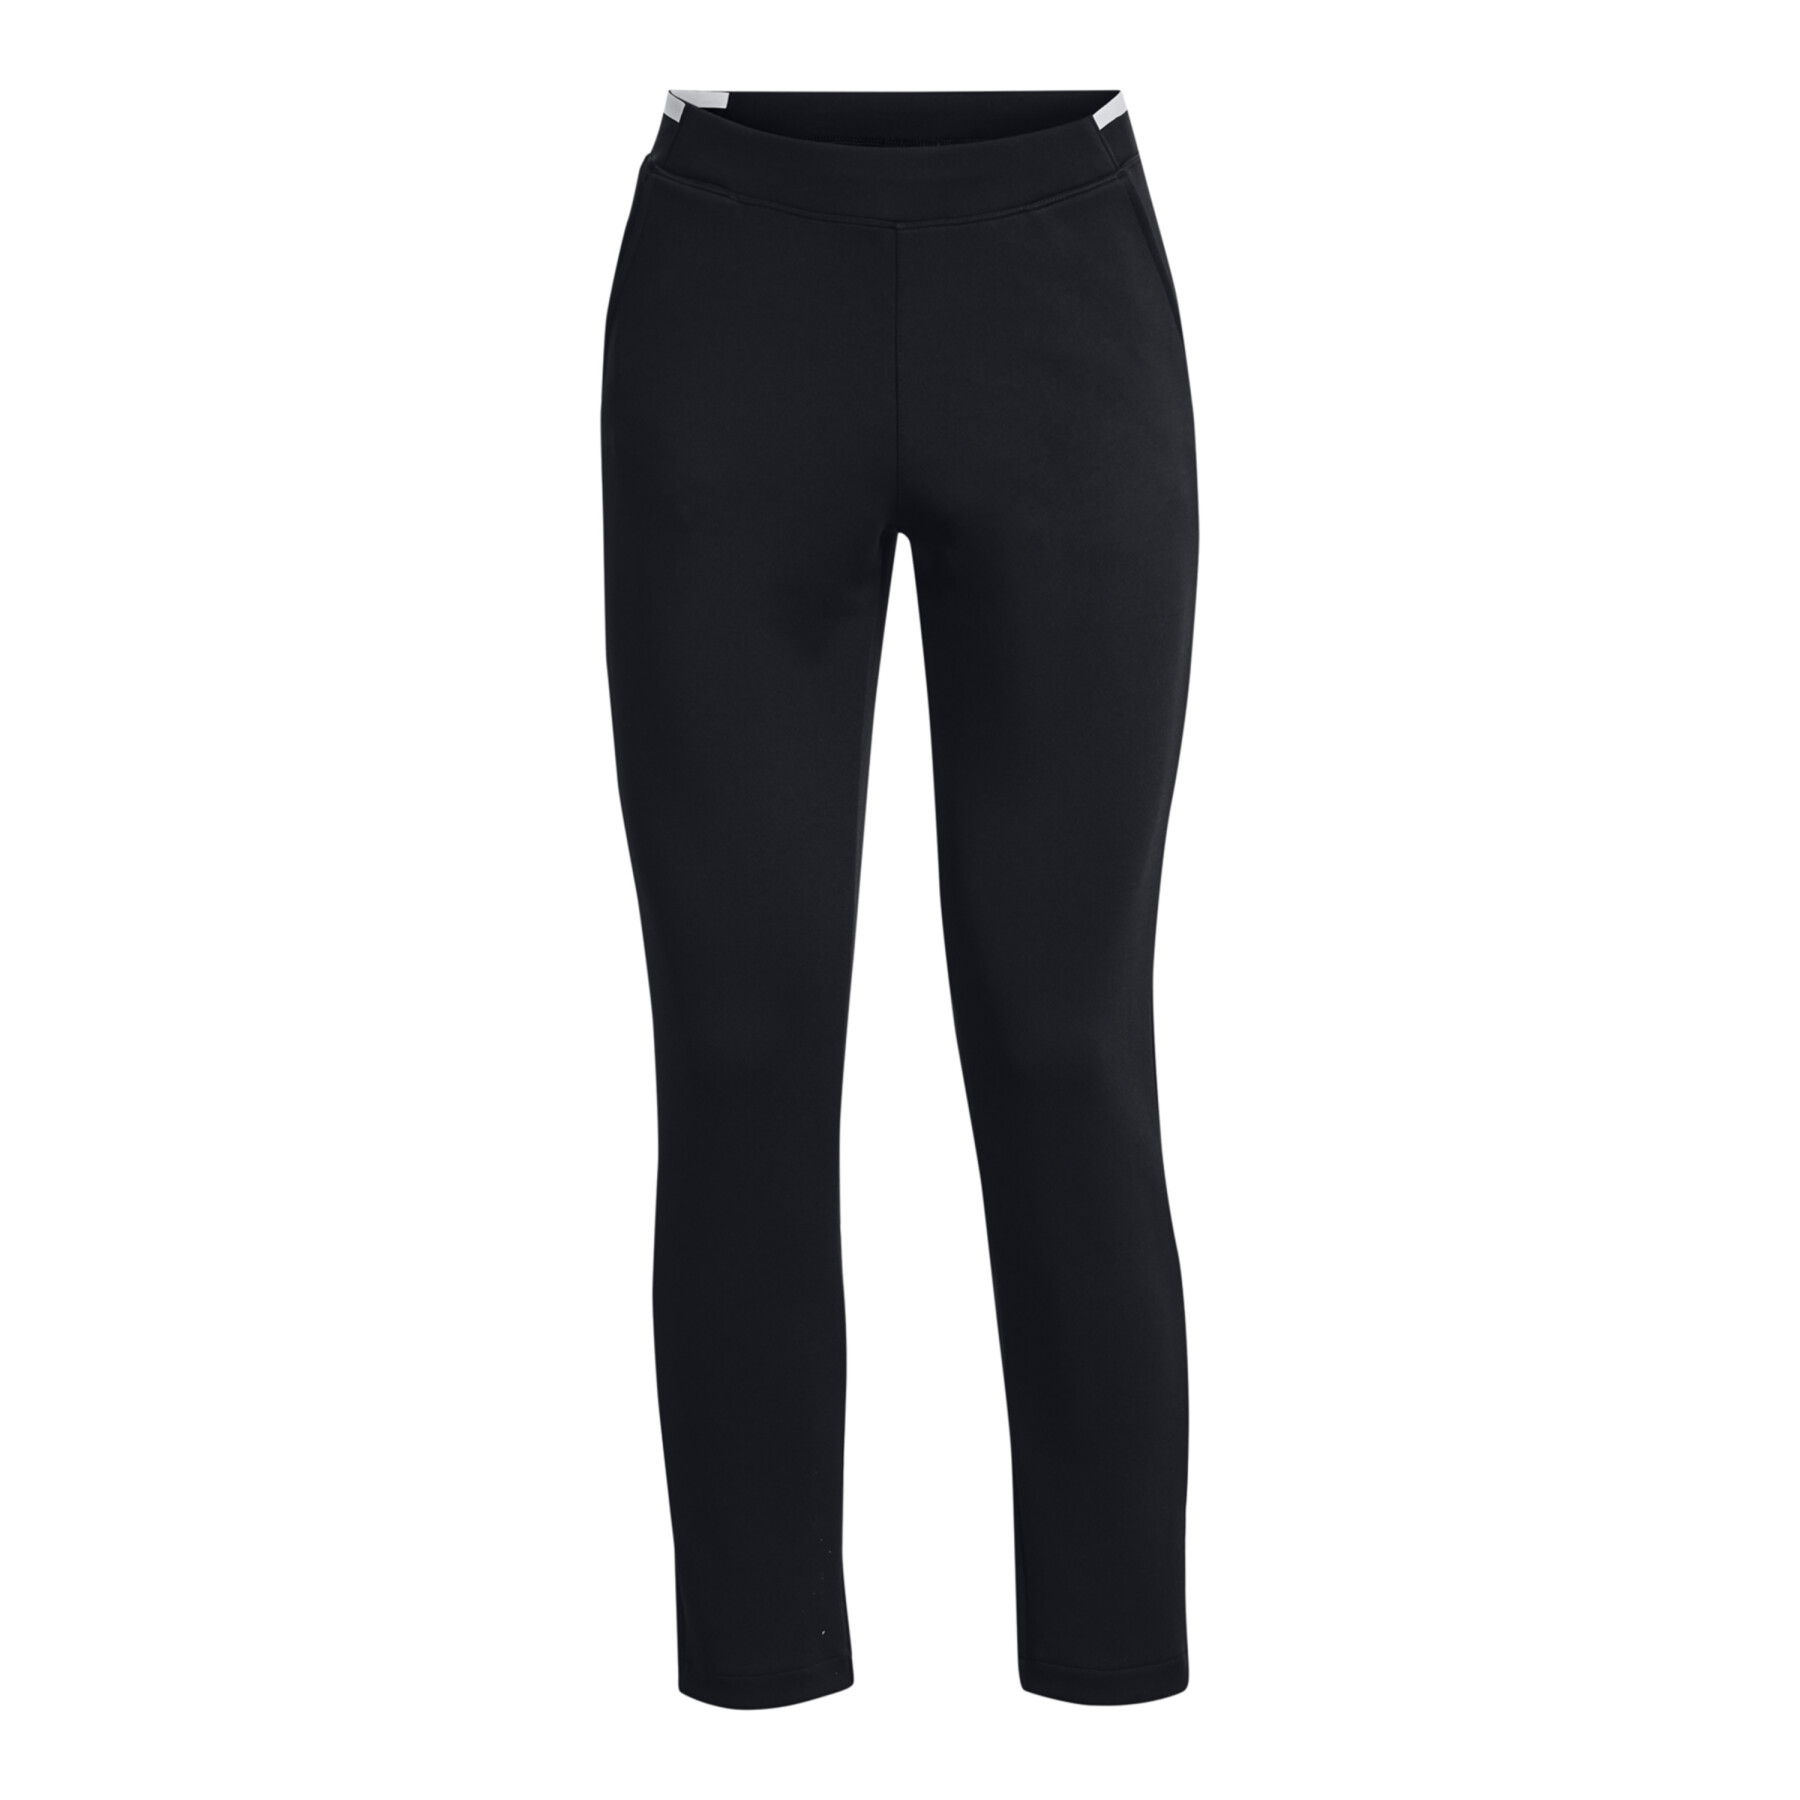 Women's pull-on jogging suit Under Armour Links